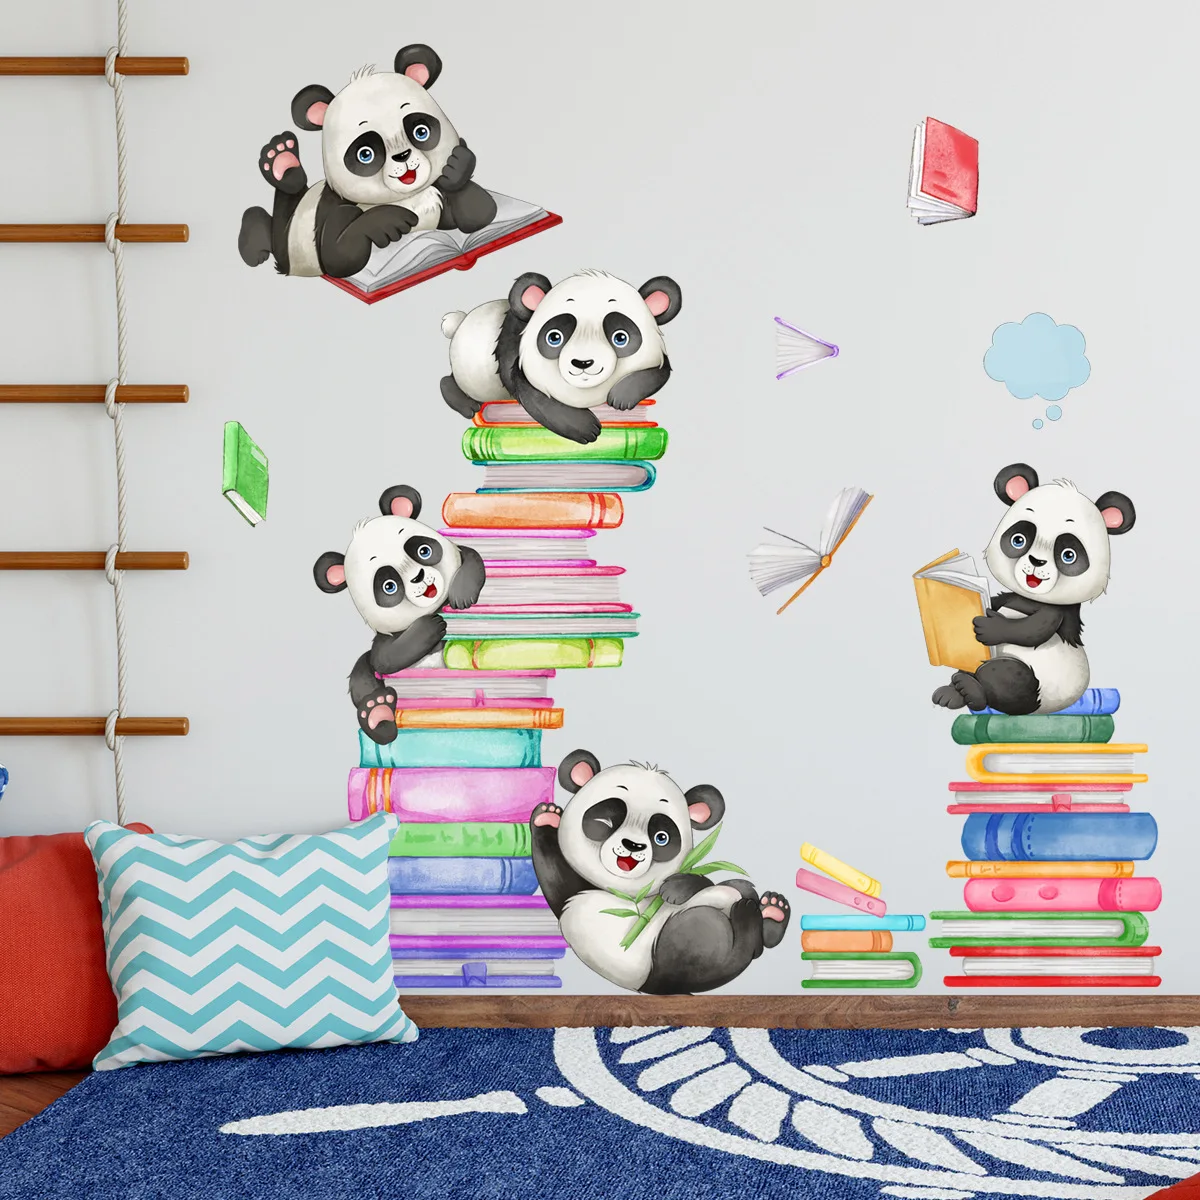 2pcs Animal Panda Book Cartoon Wall Stickers Dormitory Background Wall Home Decoration Wall Stickers Mural Wallpaper Ms6263 7 inch wall decoration paint painting machine roller brush tool sets 3d pattern wallpaper room decoration painting tools